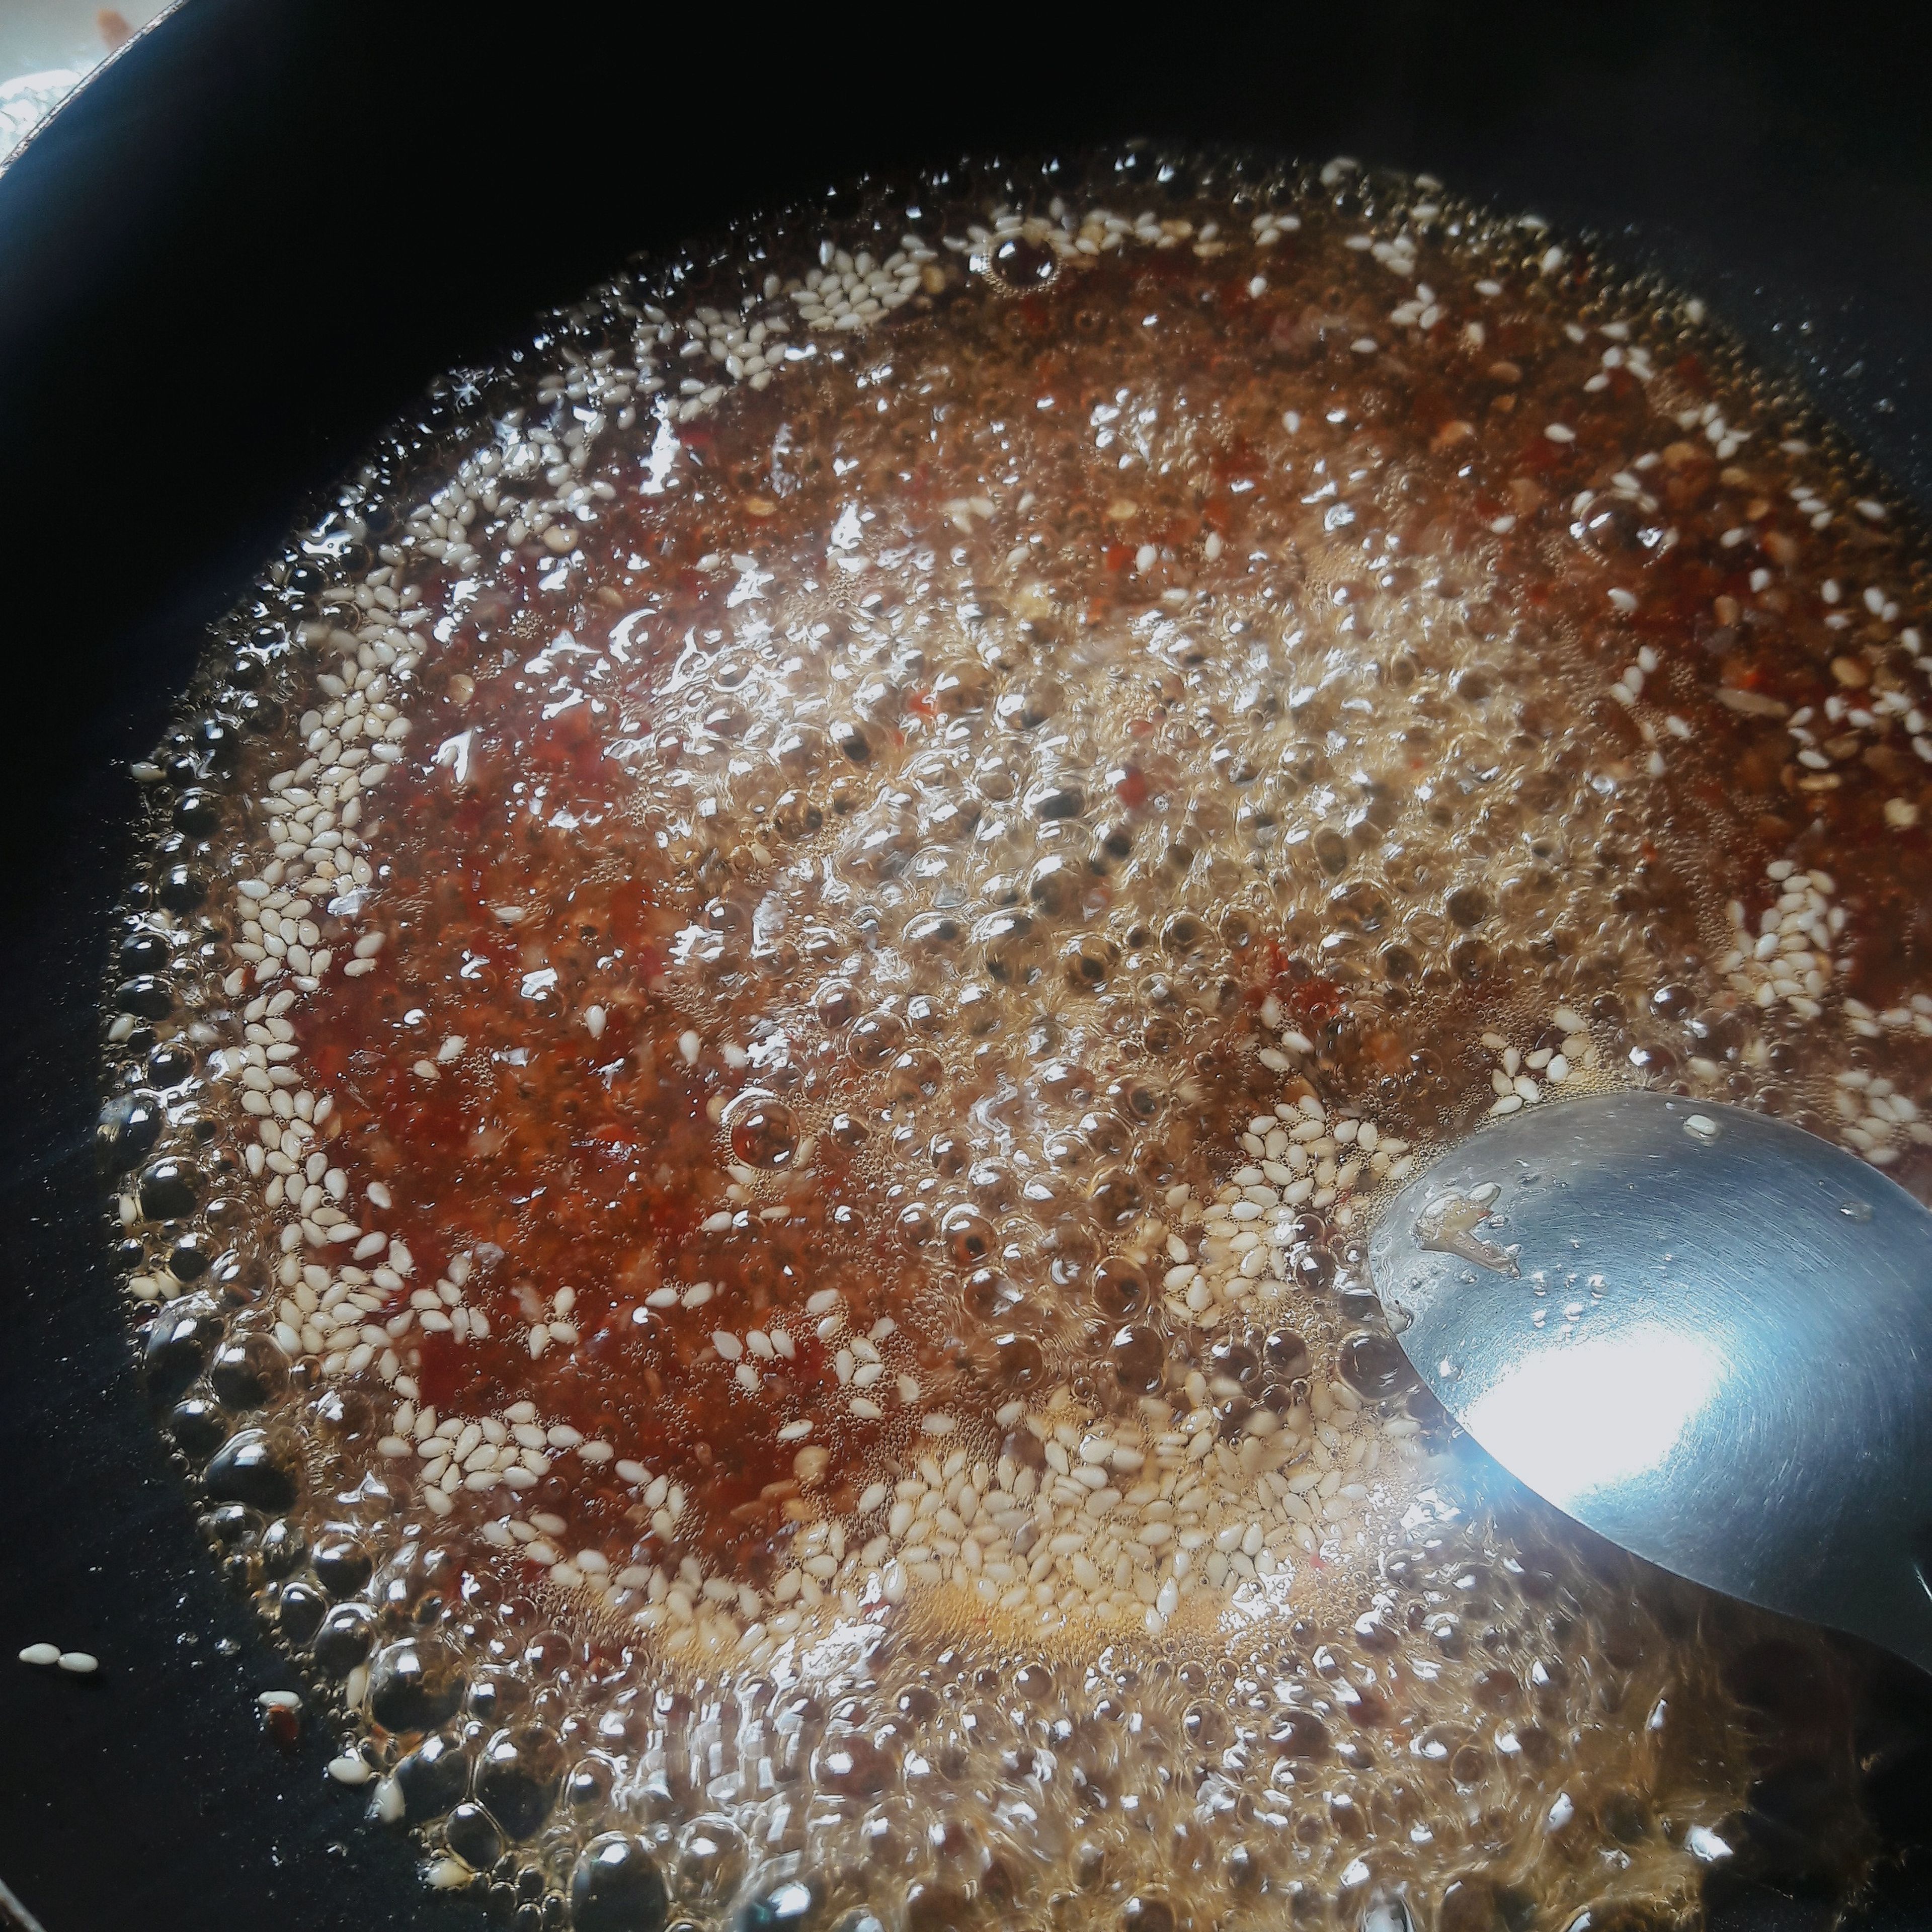 In a clean wok or pan over medium heat, add the sweet chili sauce and sesame seeds and lime. Simmer for about a minute. Add the chicken pieces and toss until evenly coated. Sprinkle with sesame seeds and chopped green onion and serve.